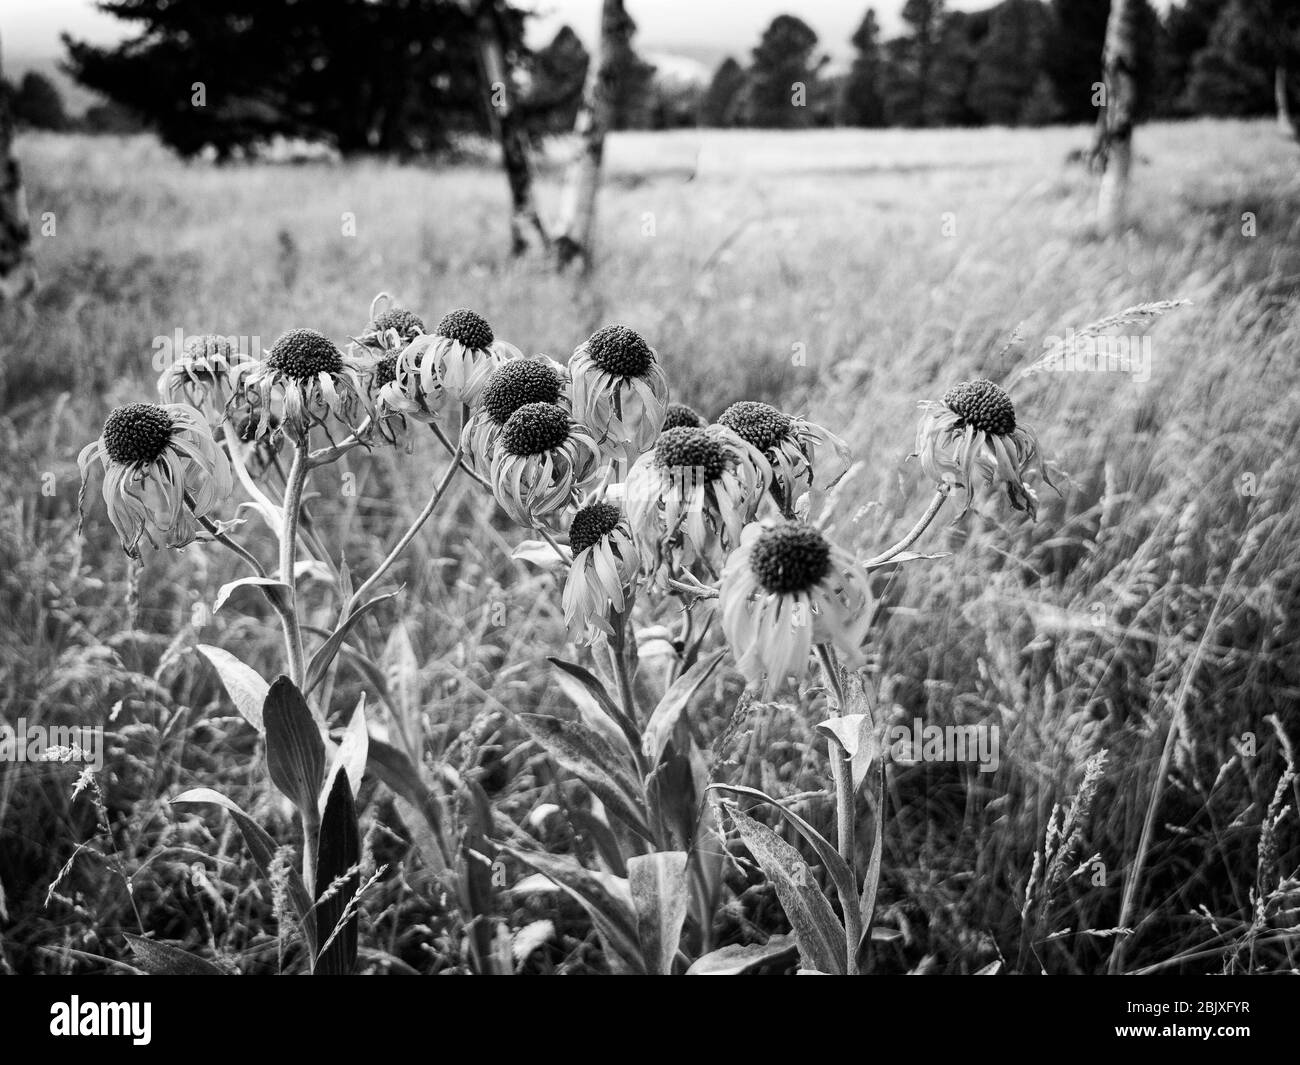 Black and white image of Black Eyed Susans in the ponderosa pine forest of Northern Arizona. Stock Photo